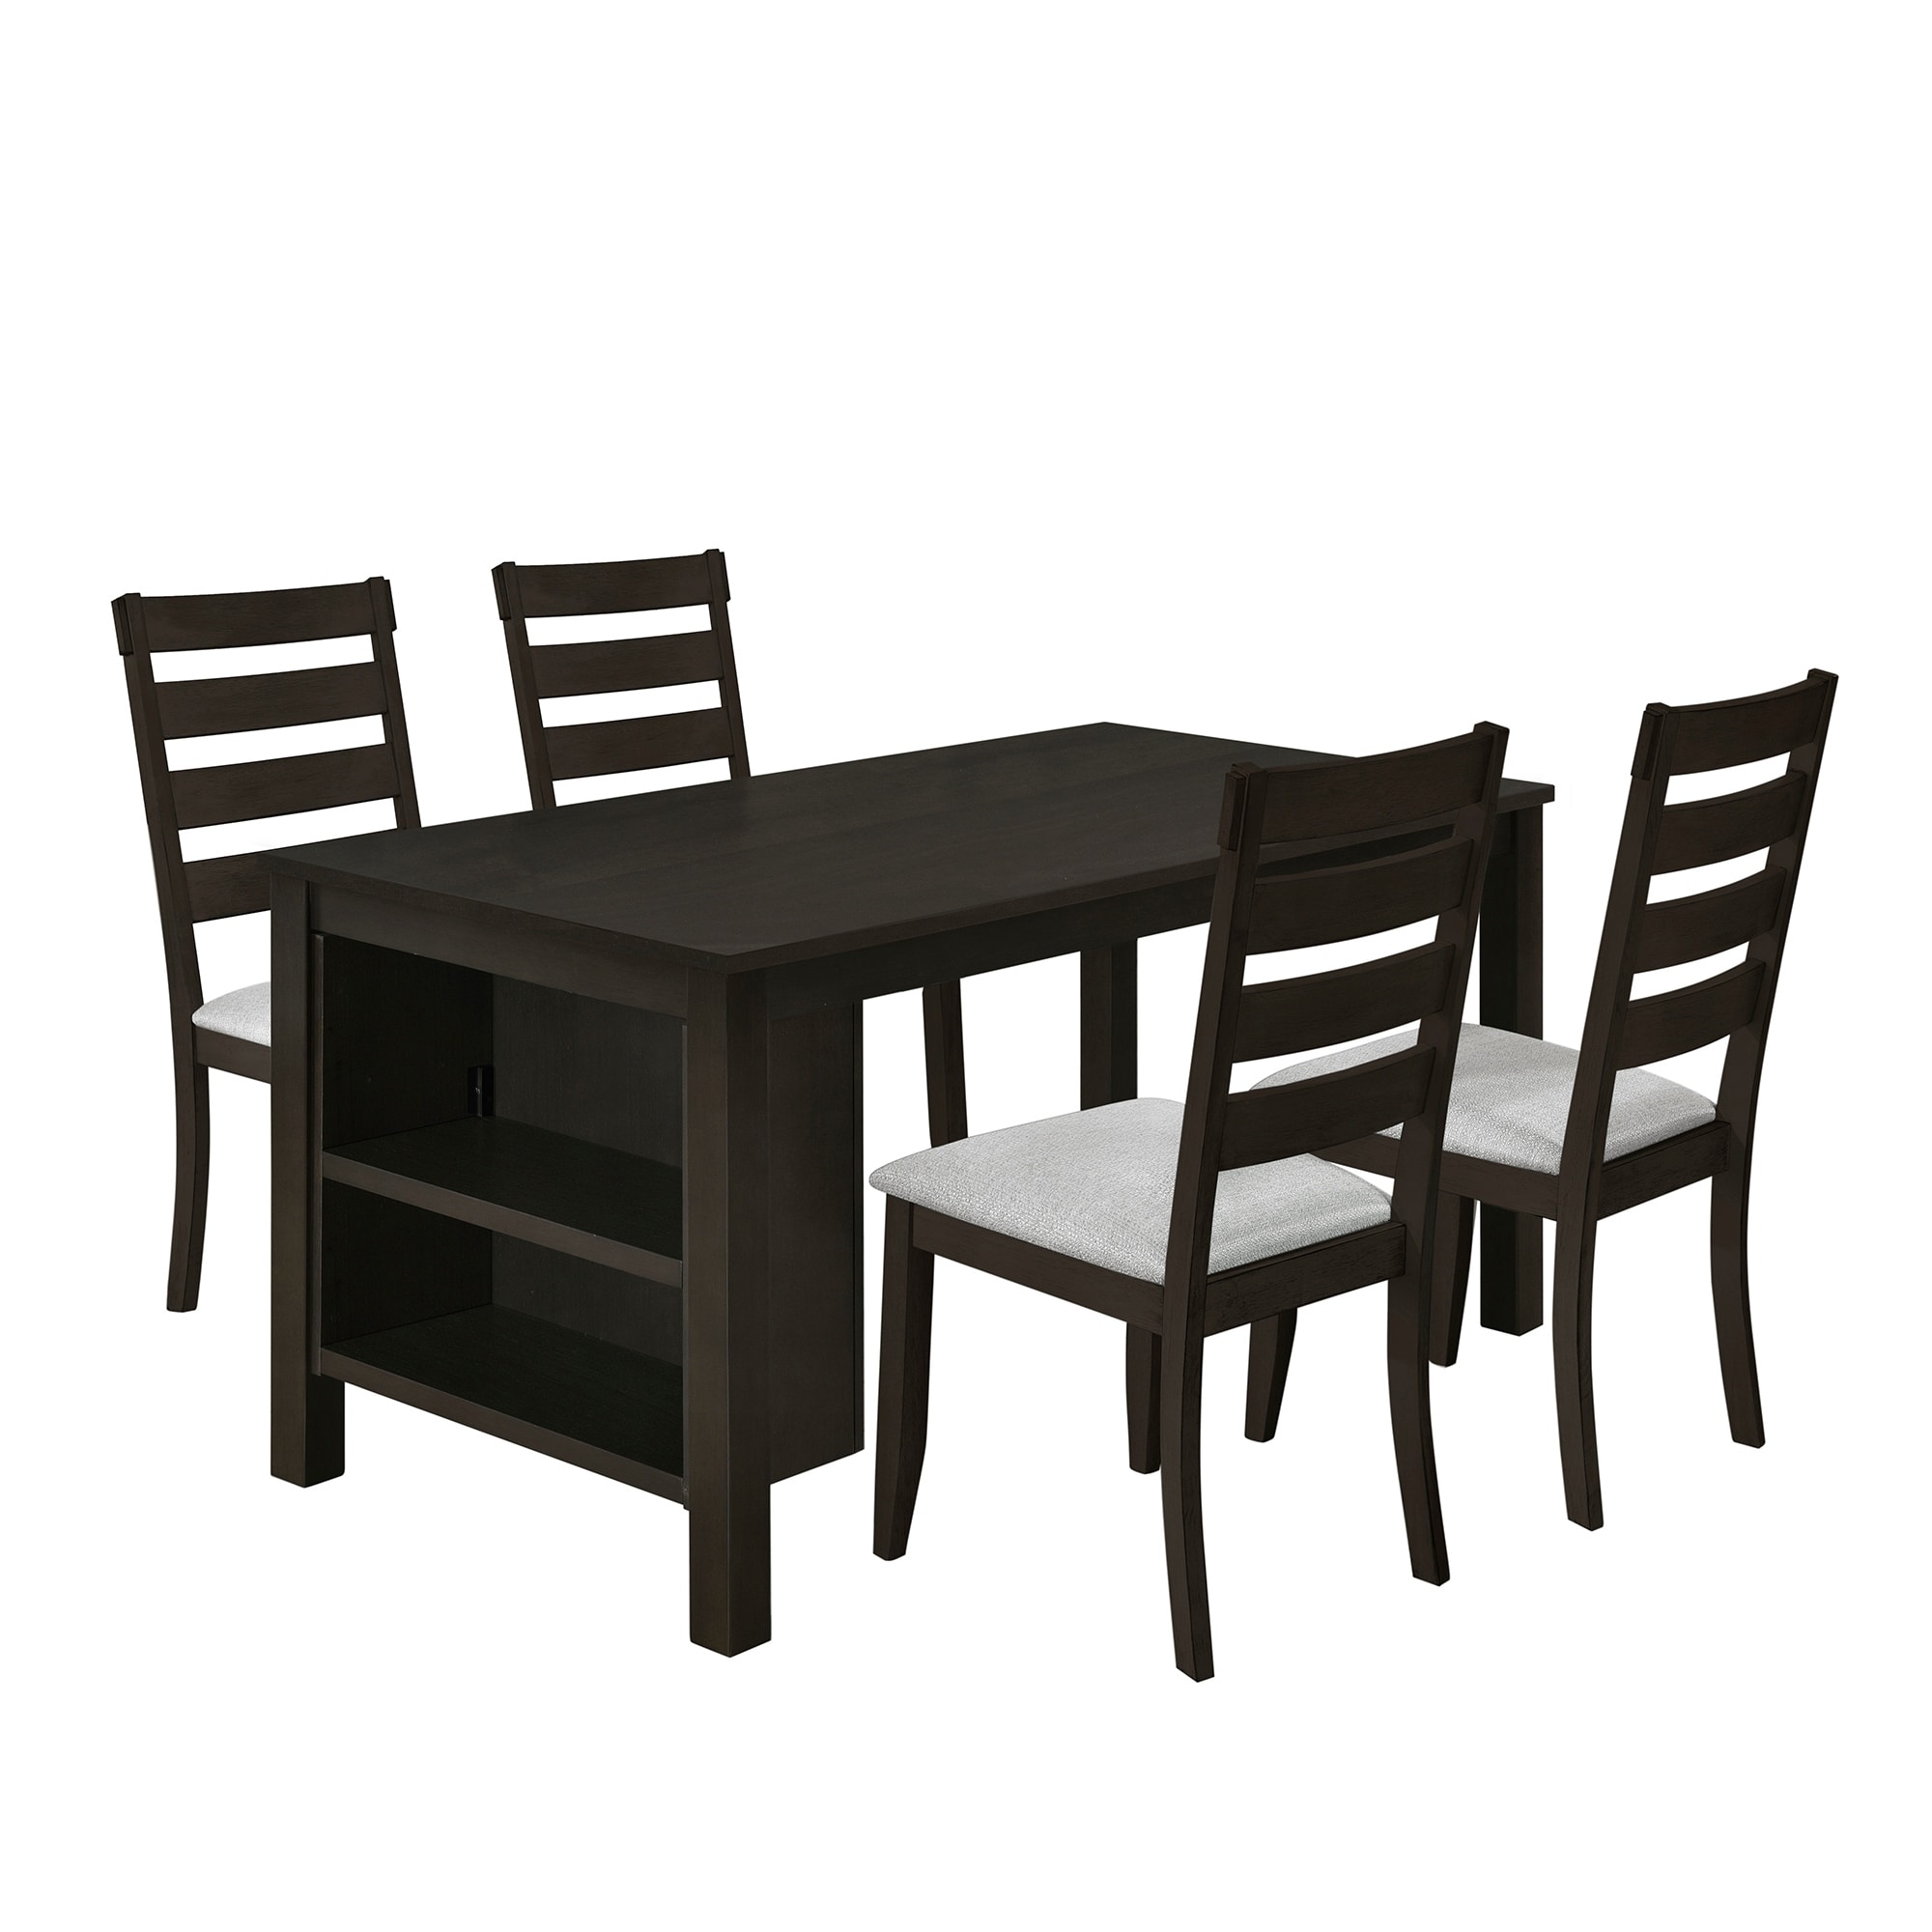 5-piece Dining Table Set With 2-tier Storage Shelves